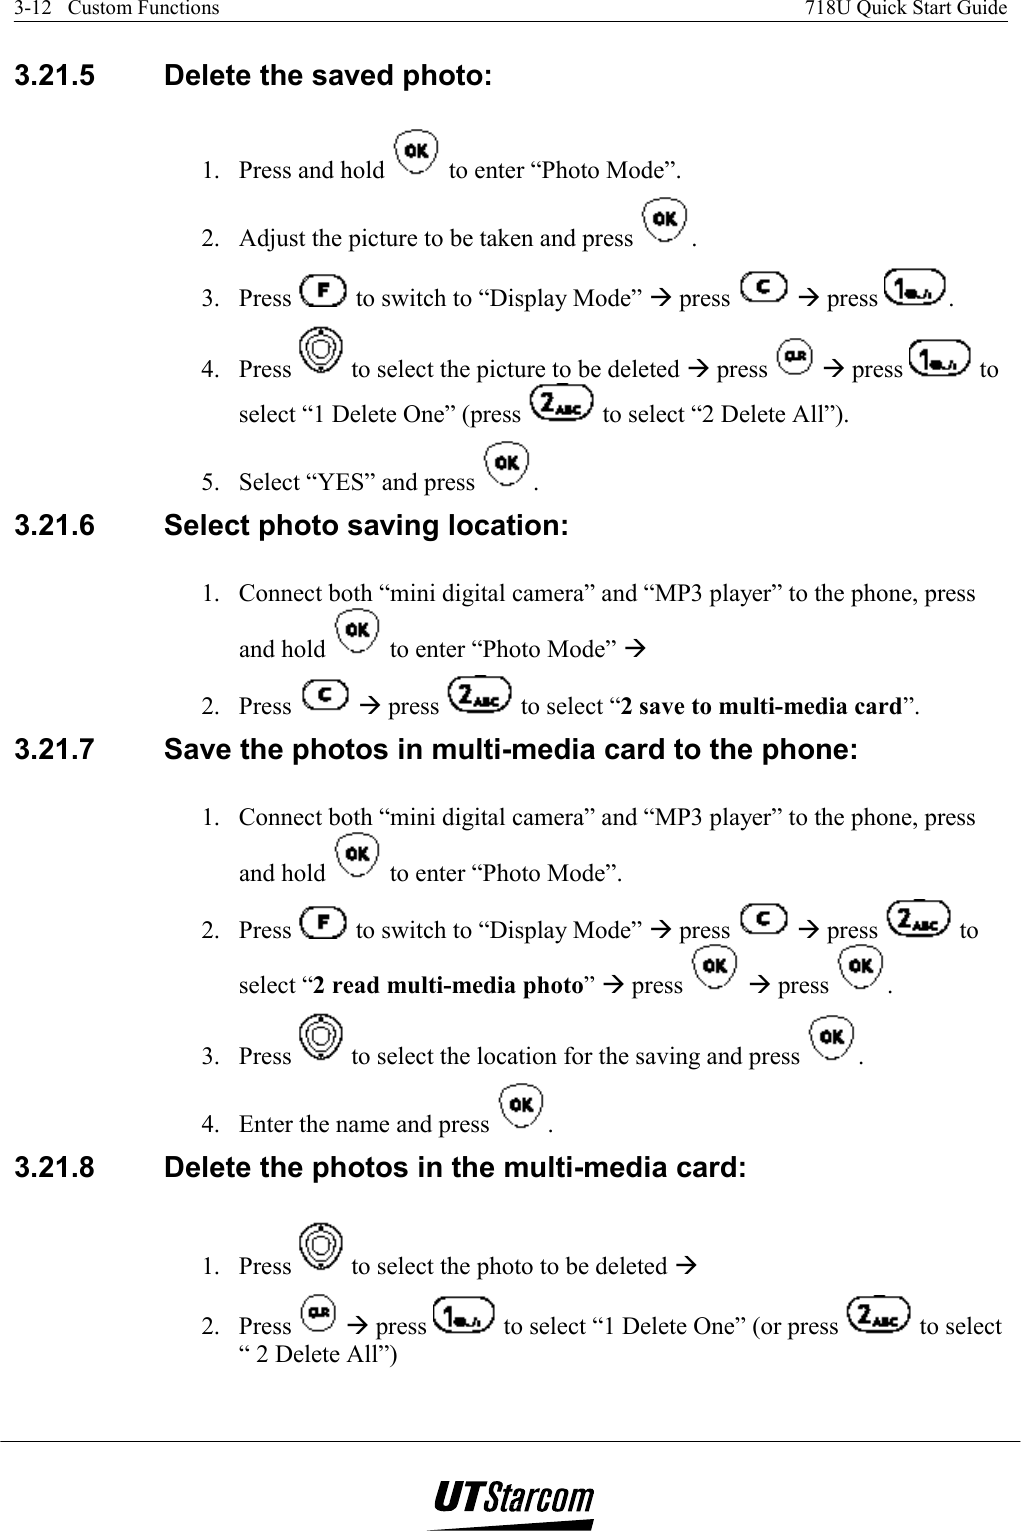 3-12   Custom Functions    718U Quick Start Guide   3.21.5  Delete the saved photo:  1.  Press and hold   to enter “Photo Mode”. 2.  Adjust the picture to be taken and press  . 3. Press   to switch to “Display Mode” Æ press   Æ press  . 4. Press   to select the picture to be deleted Æ press   Æ press   to select “1 Delete One” (press   to select “2 Delete All”). 5.  Select “YES” and press  . 3.21.6  Select photo saving location:  1.  Connect both “mini digital camera” and “MP3 player” to the phone, press and hold   to enter “Photo Mode” Æ  2. Press   Æ press   to select “2 save to multi-media card”. 3.21.7  Save the photos in multi-media card to the phone:  1.  Connect both “mini digital camera” and “MP3 player” to the phone, press and hold   to enter “Photo Mode”. 2. Press   to switch to “Display Mode” Æ press   Æ press   to select “2 read multi-media photo” Æ press   Æ press  . 3. Press   to select the location for the saving and press  . 4.  Enter the name and press  . 3.21.8  Delete the photos in the multi-media card:  1. Press   to select the photo to be deleted Æ  2. Press   Æ press   to select “1 Delete One” (or press   to select “ 2 Delete All”) 